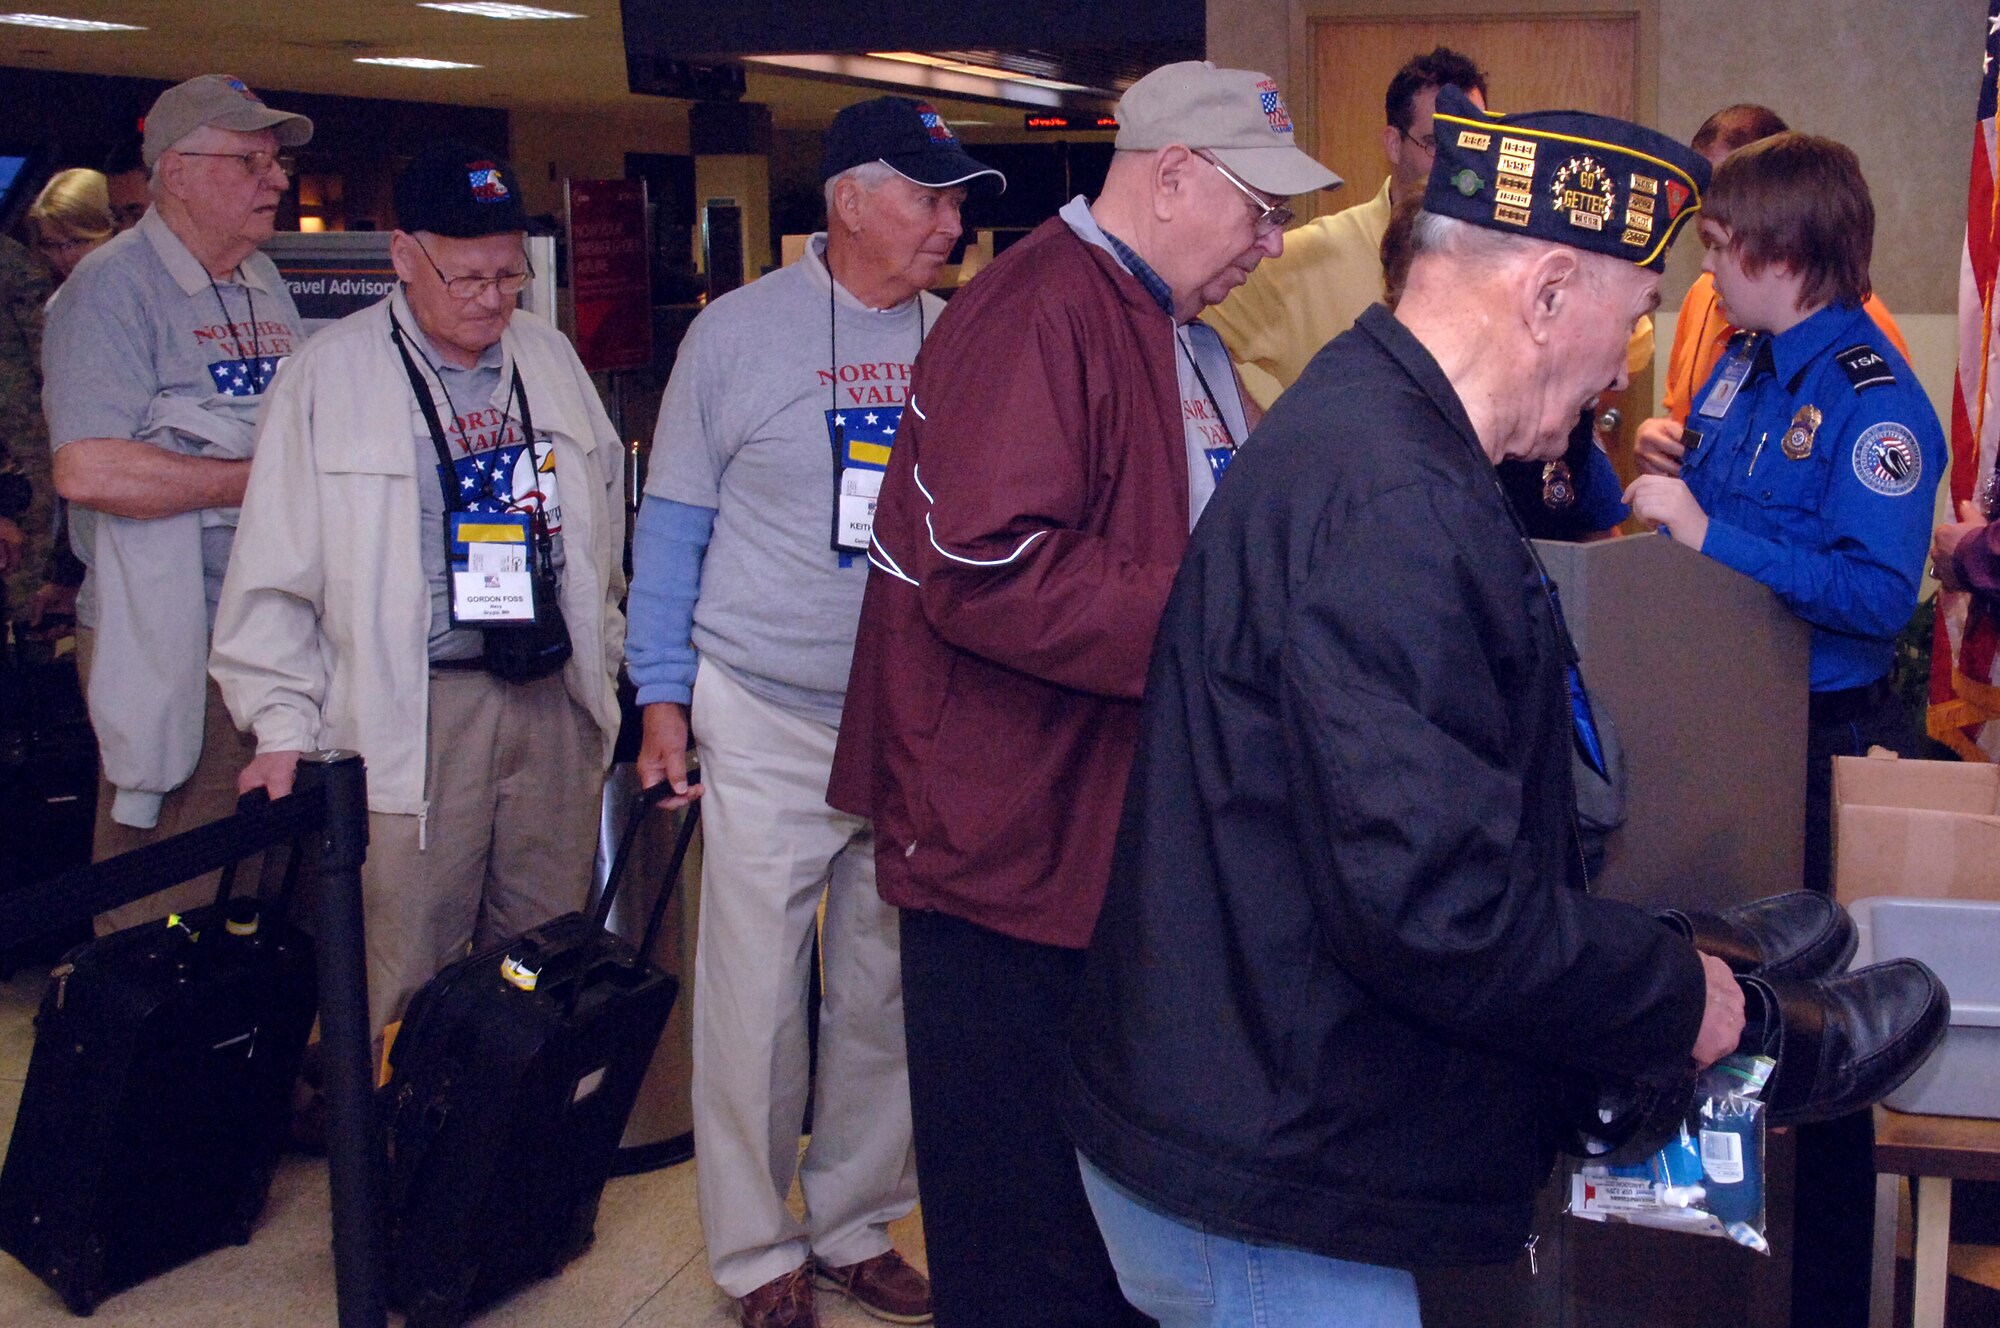 World War II veterans line up at the security check point at Grand Forks International Airport April 17. About 90 veterans participated in the Northern Valley Honor Flight trip to Washington, D.C. (U.S. Air Force photo/Master Sgt. Paul Cox)